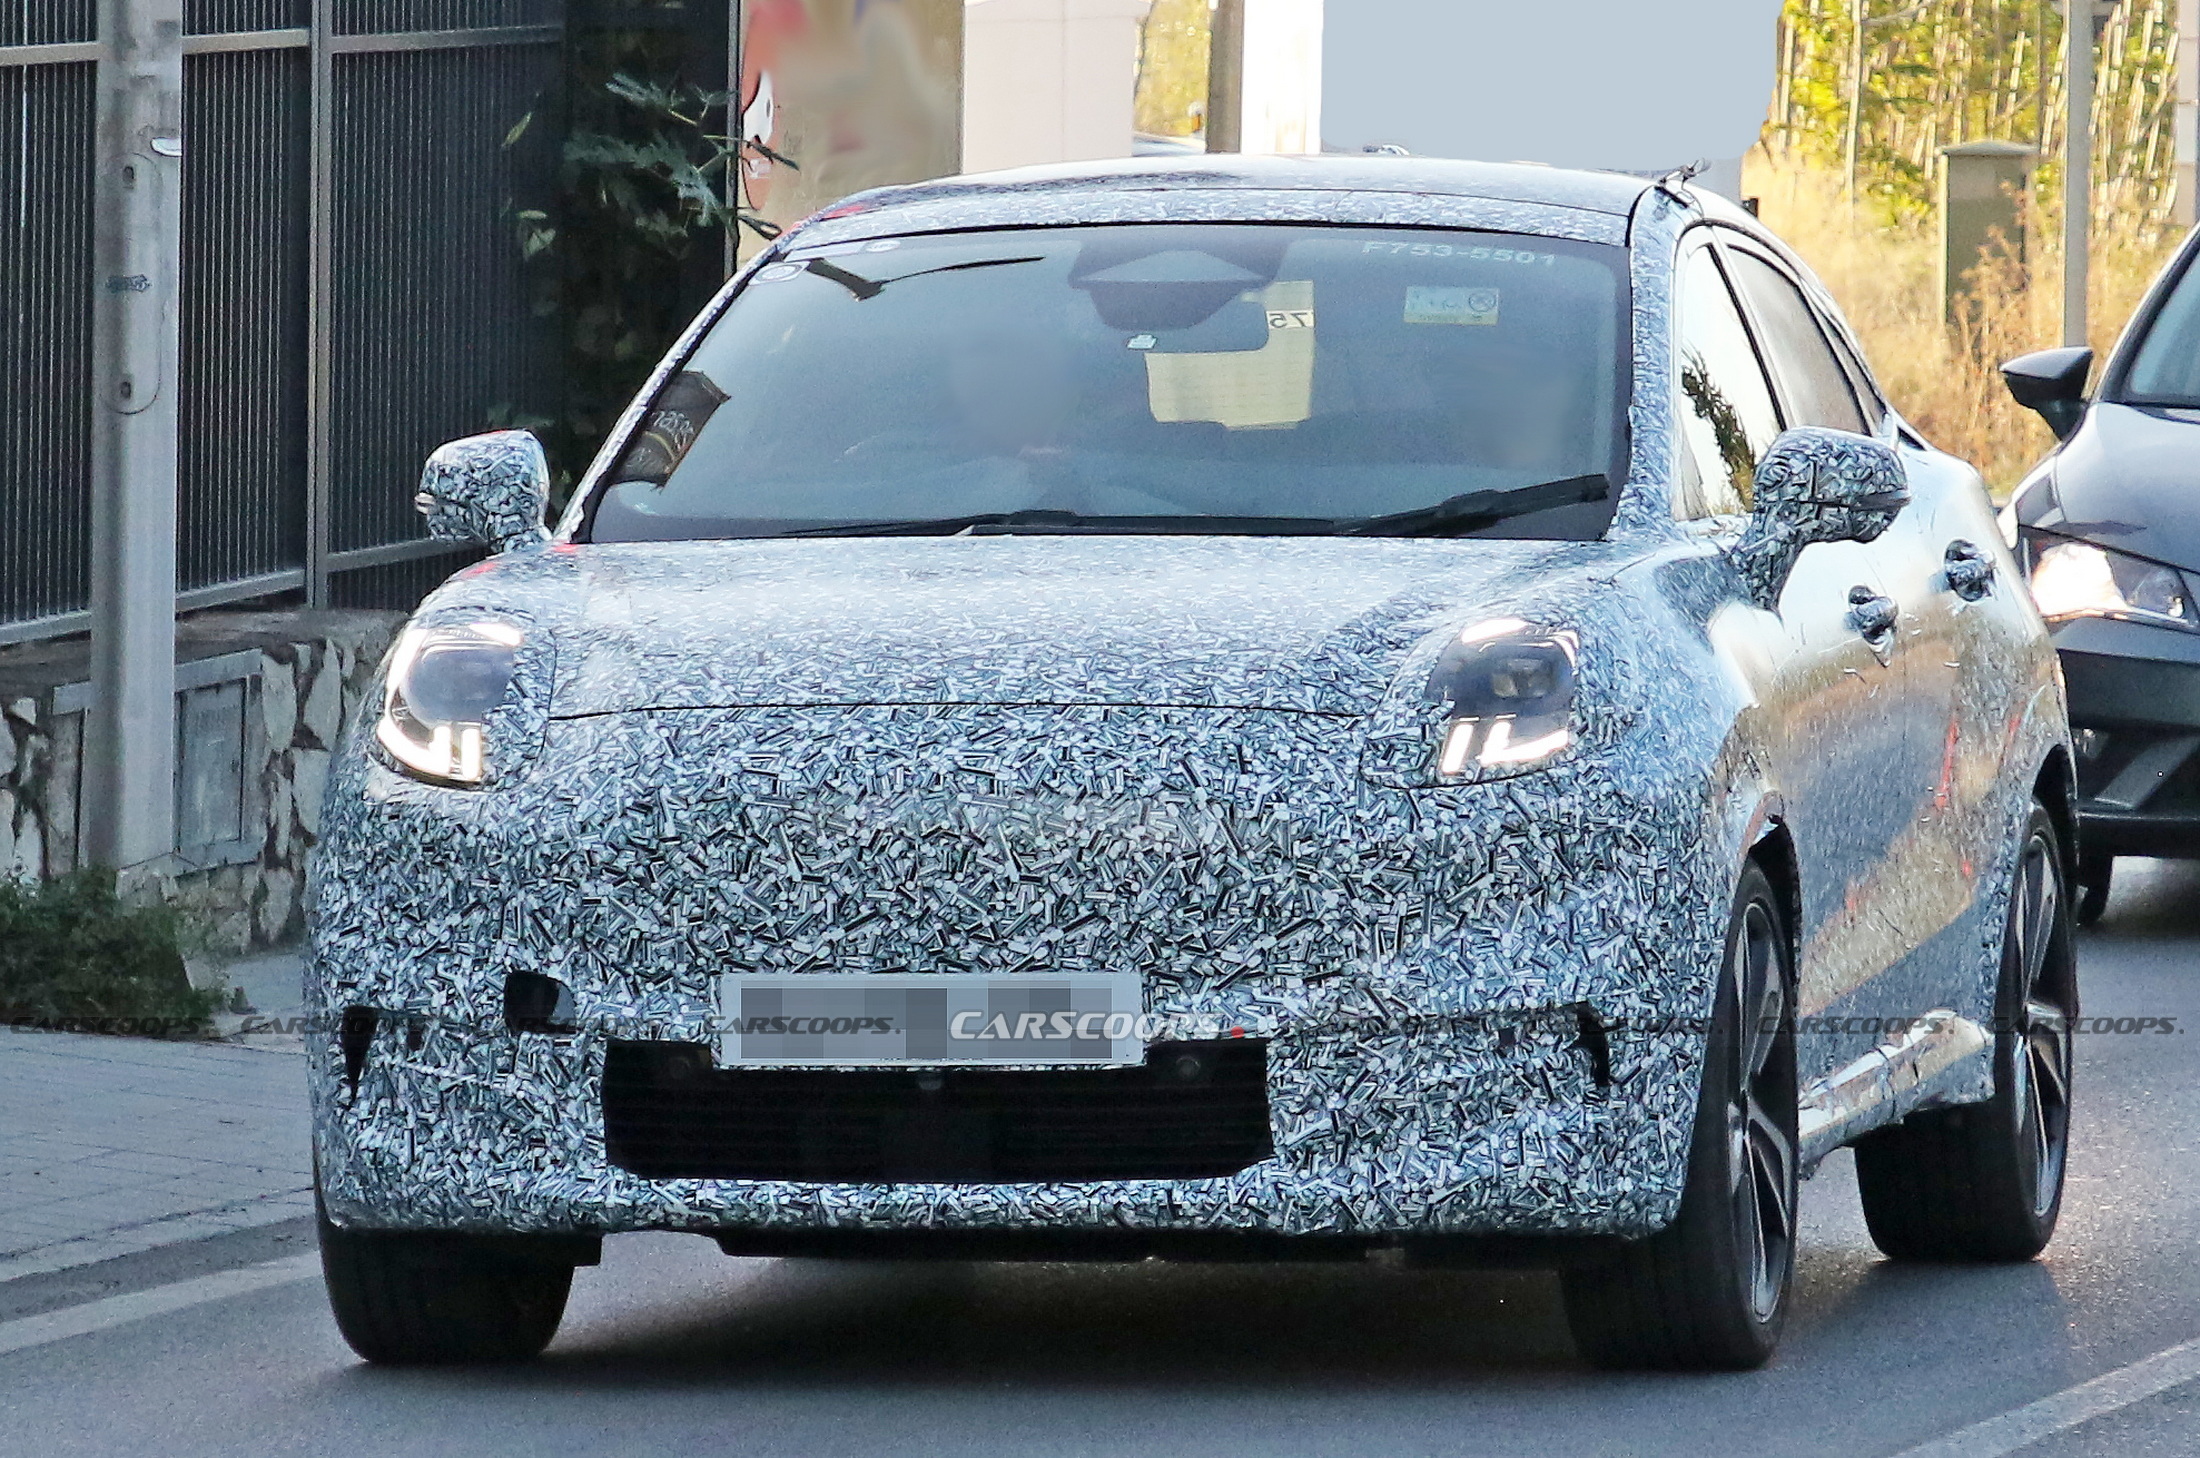 Facelifted Ford Puma Spied In EV Form, Flaunting Its Covered